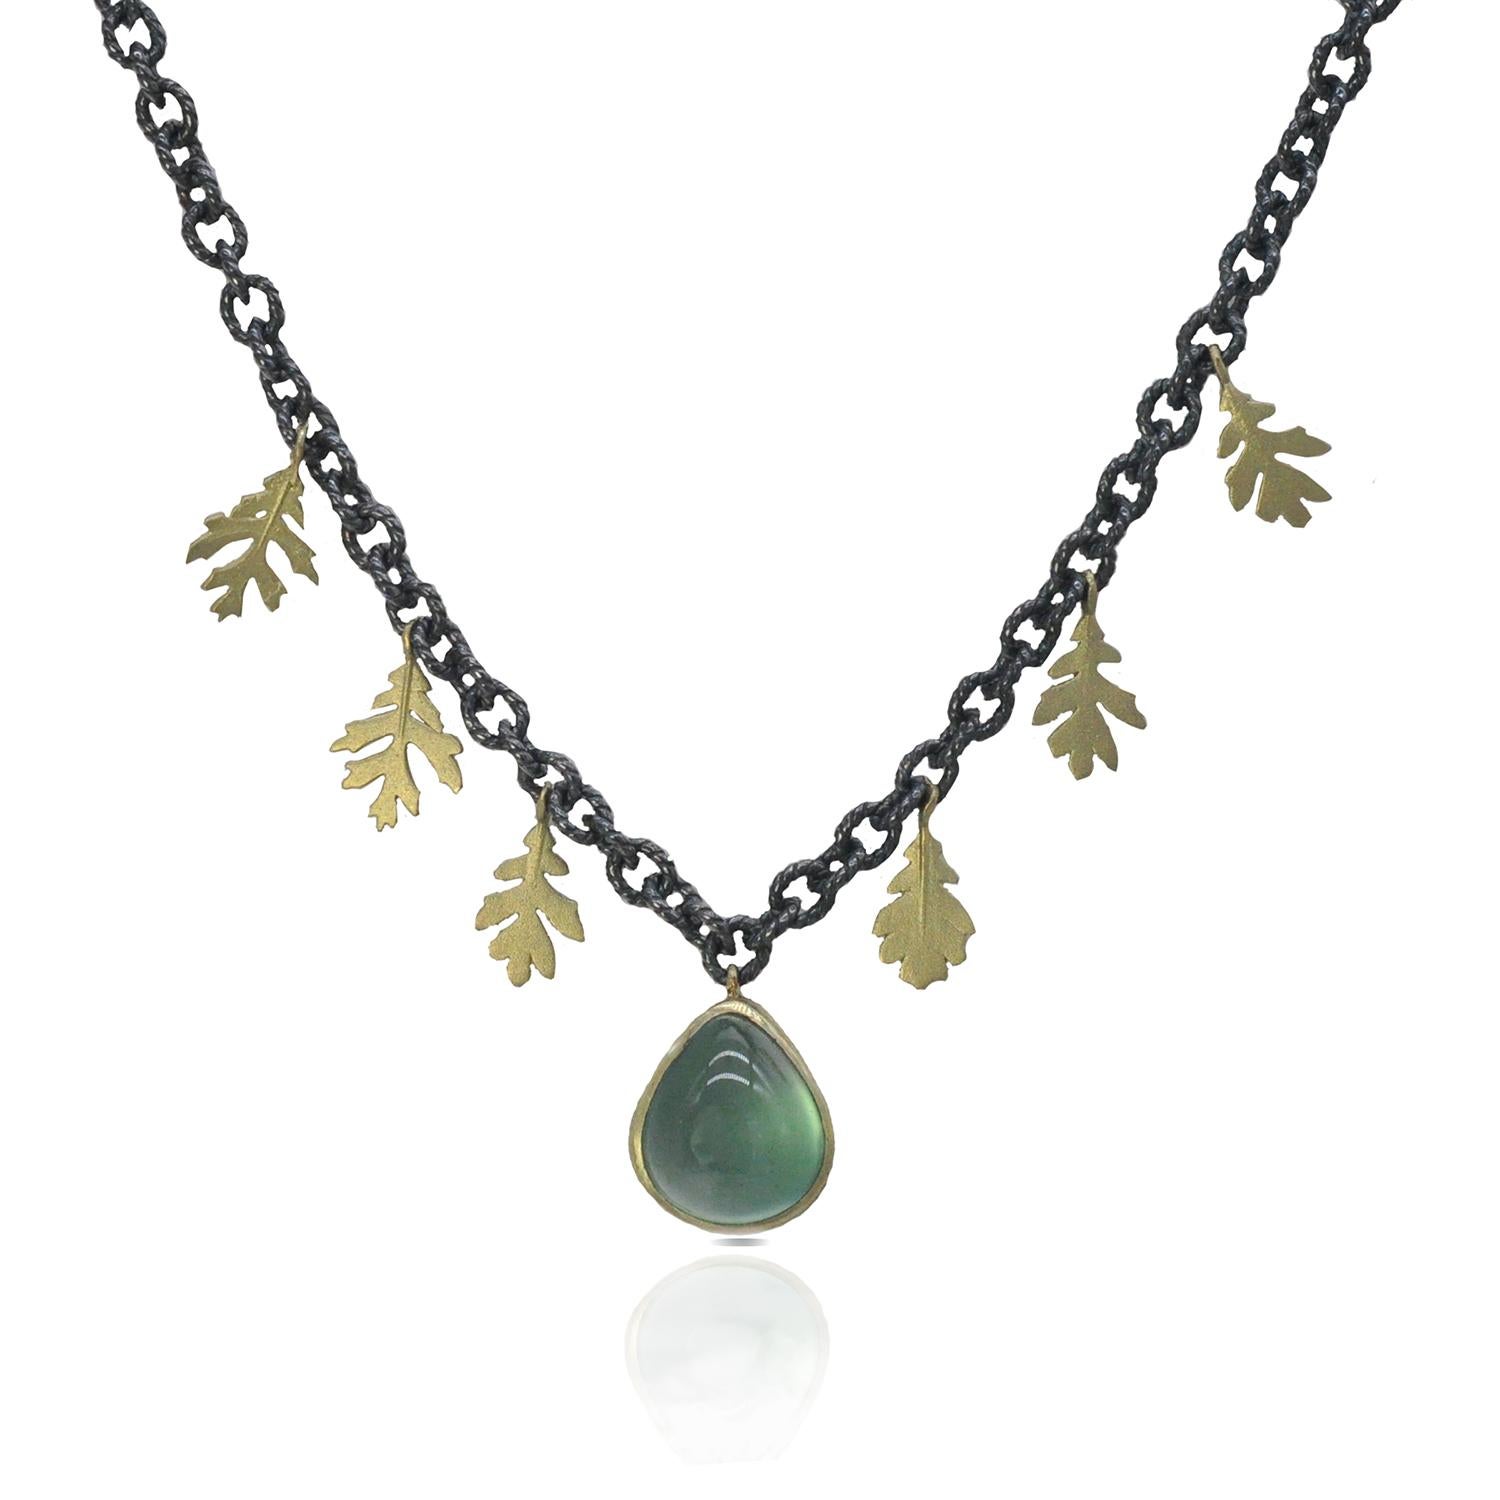 A sweet burst of soft leaf green glows in this version of our oak leaf necklace. A beautiful pear shaped prehnite sits between 18k yellow gold leaves that flutter along an oxidized silver chain for an elevated, bohemian style. The prehnite is 1/2